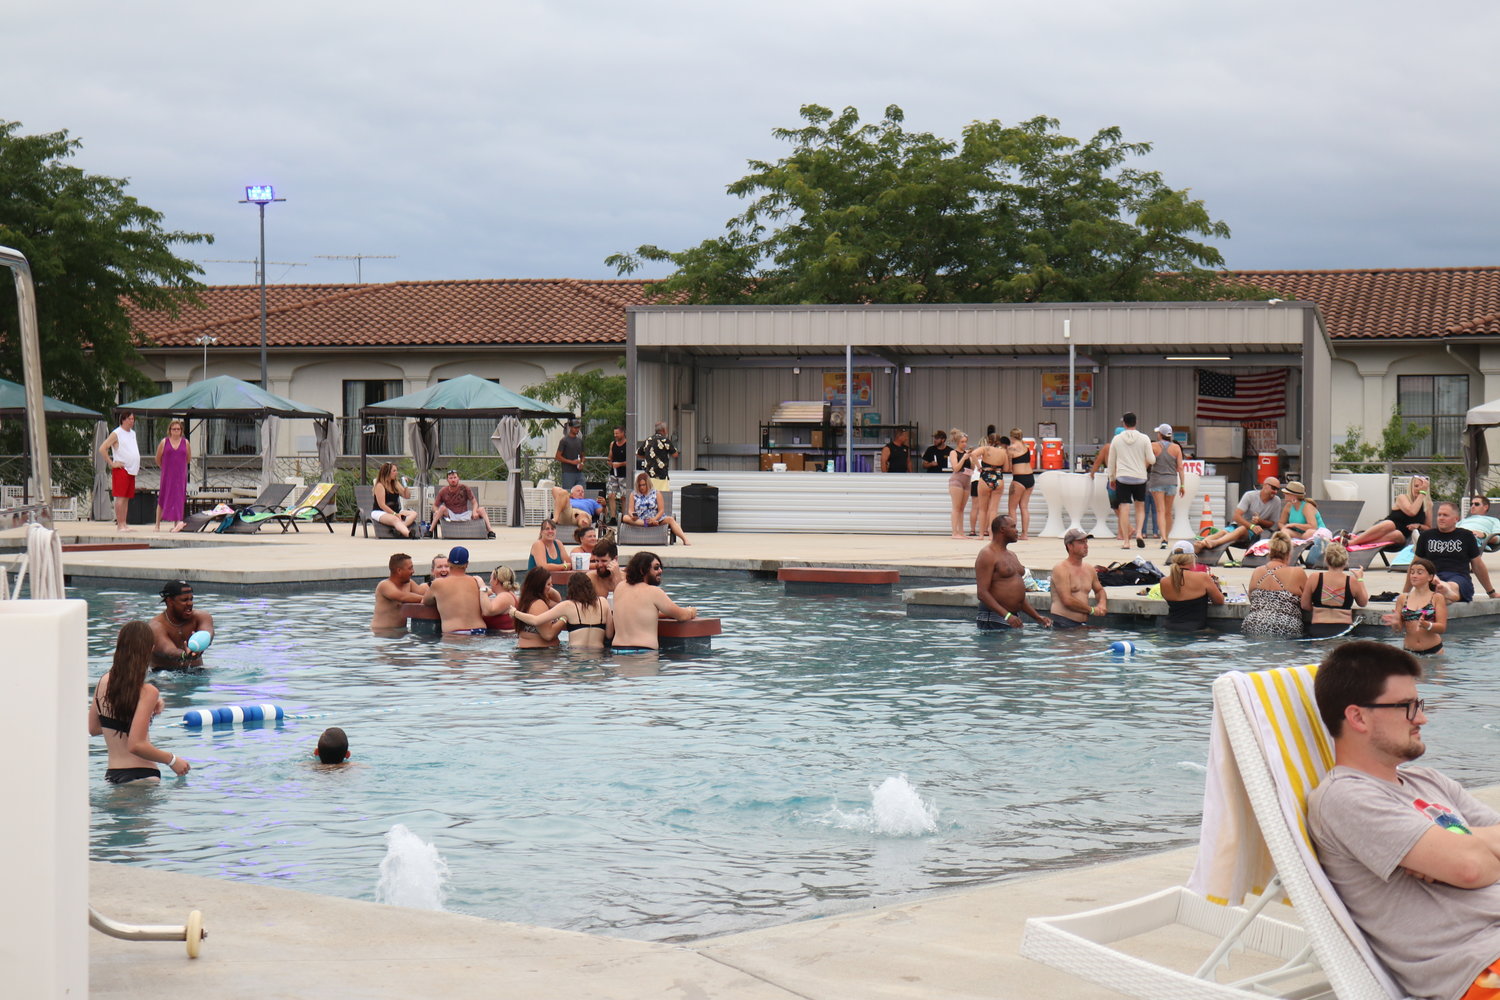 The Hippopotamus Swim Up Bar at the Regalia is coined as the largest swim up bar in the midwest.